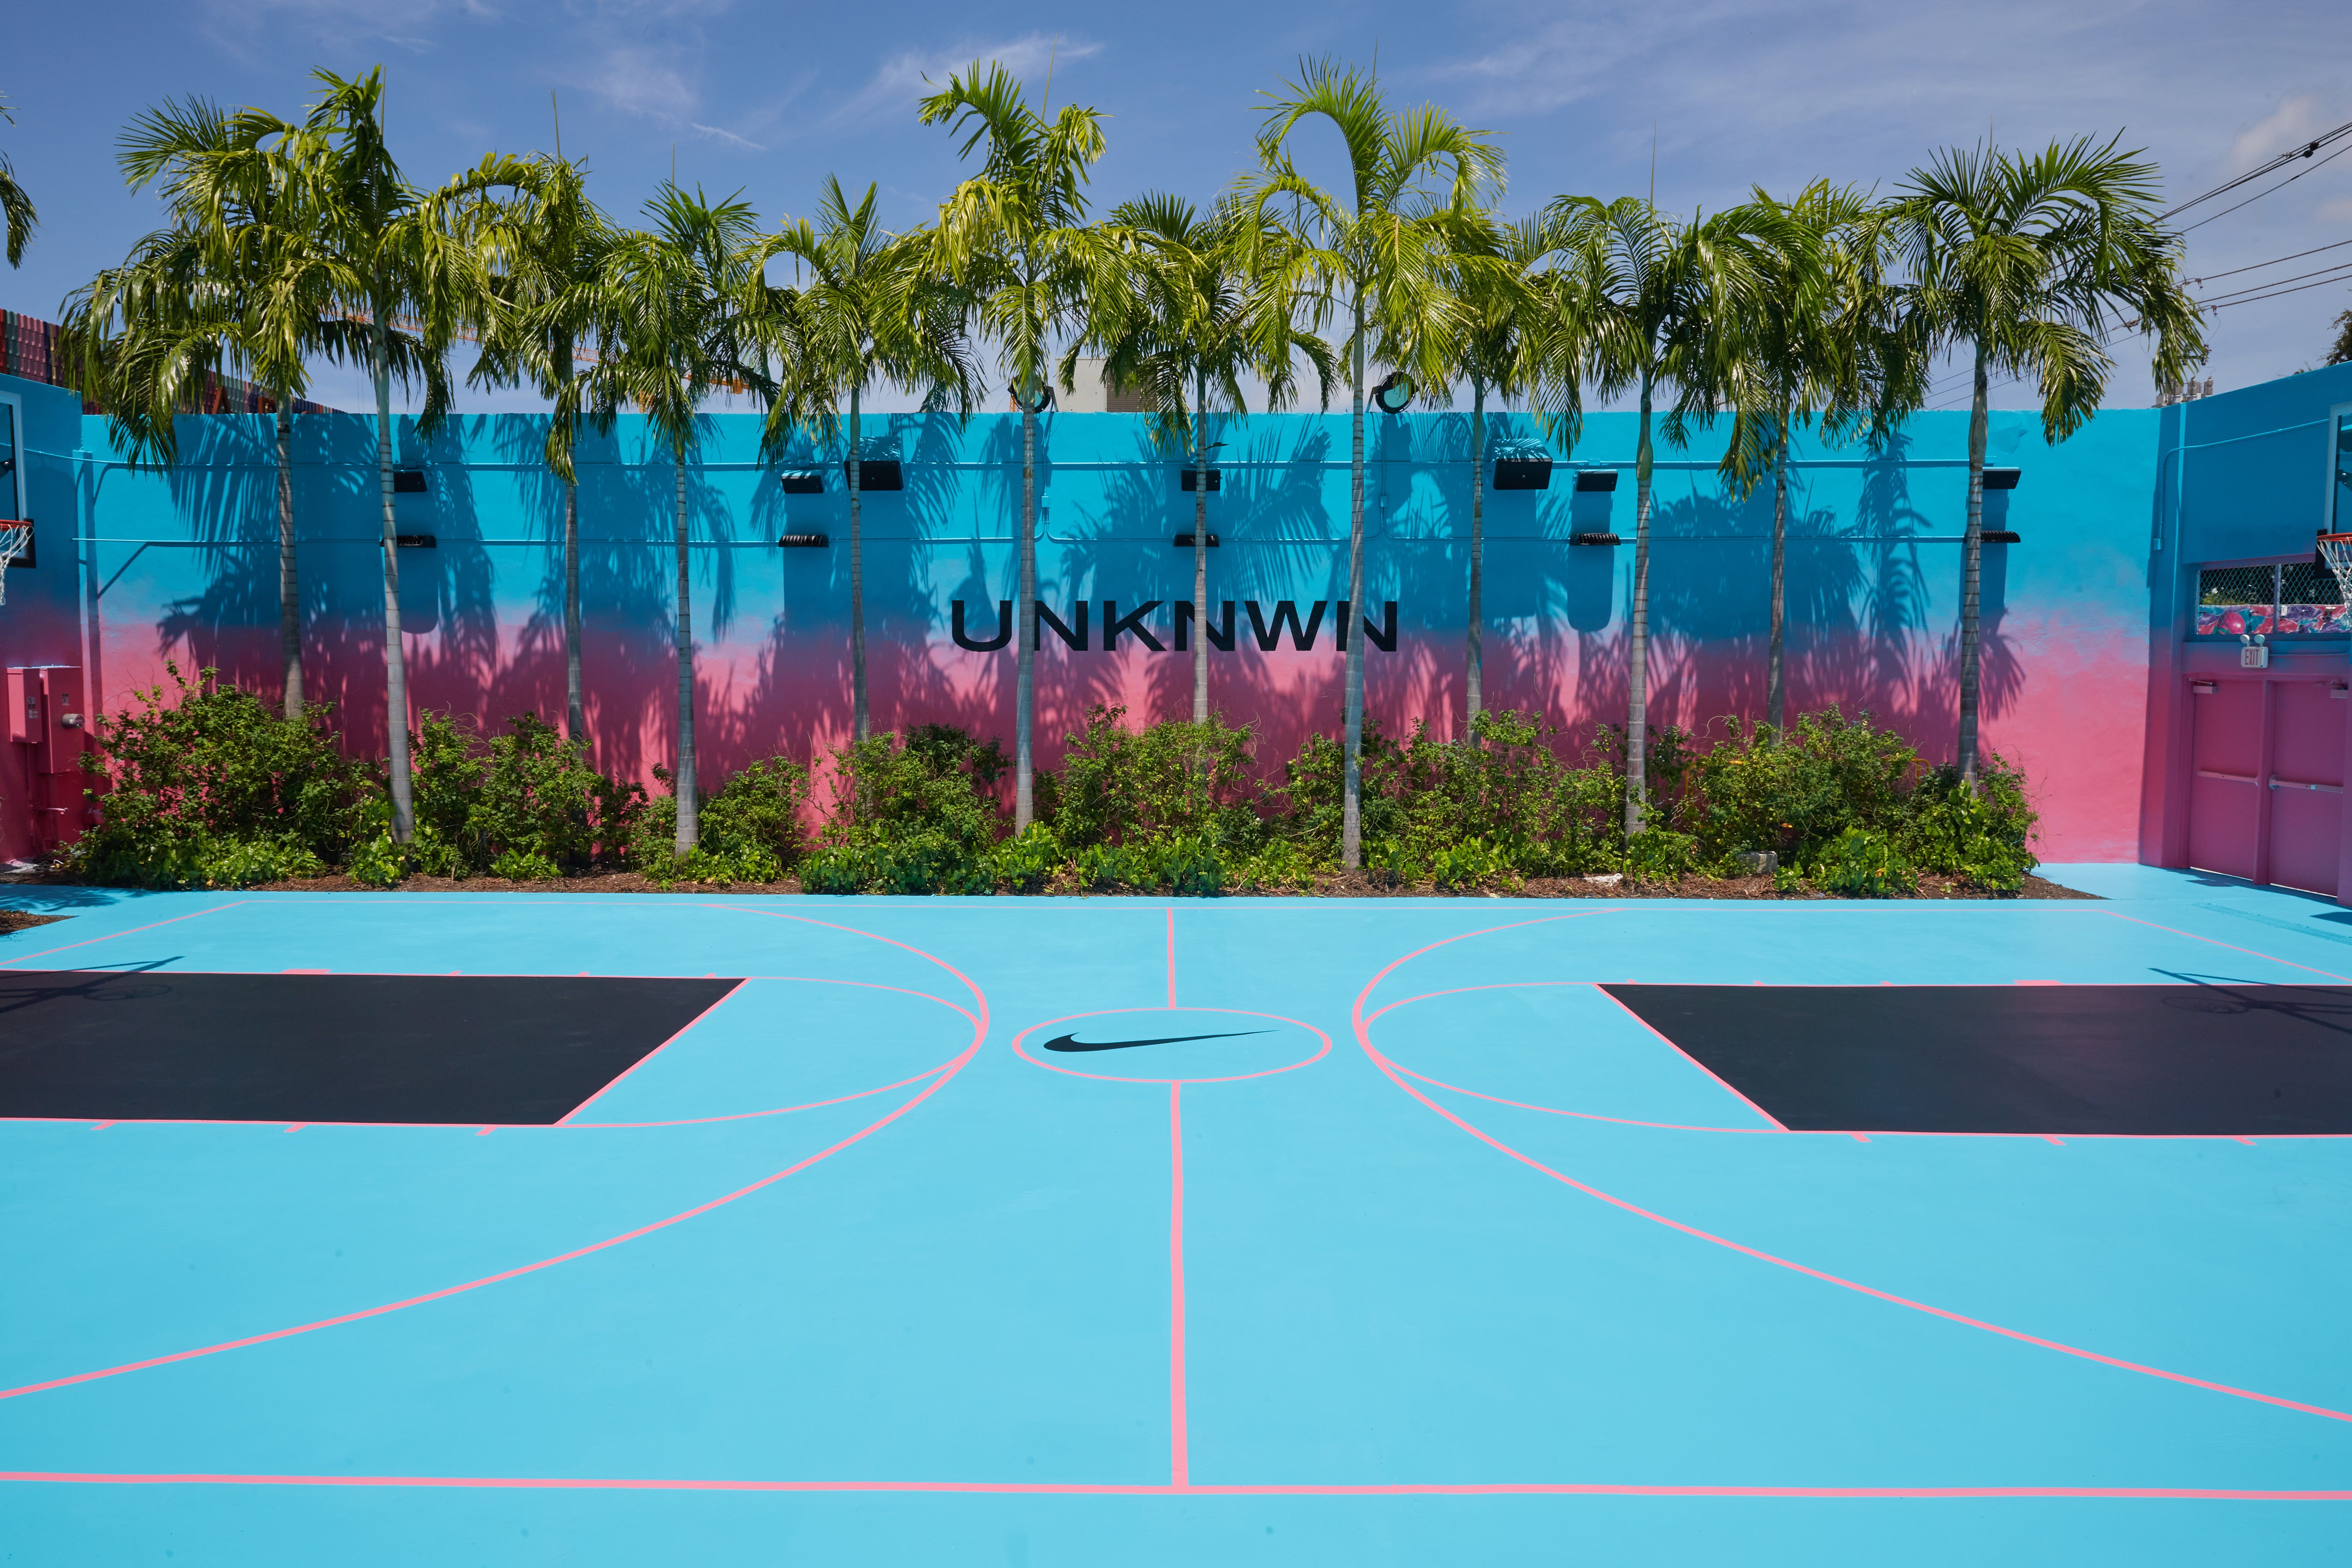 UNKNWN Launches LeBron 8 “South Beach” Inspired Basketball Court In Miami [Photos]